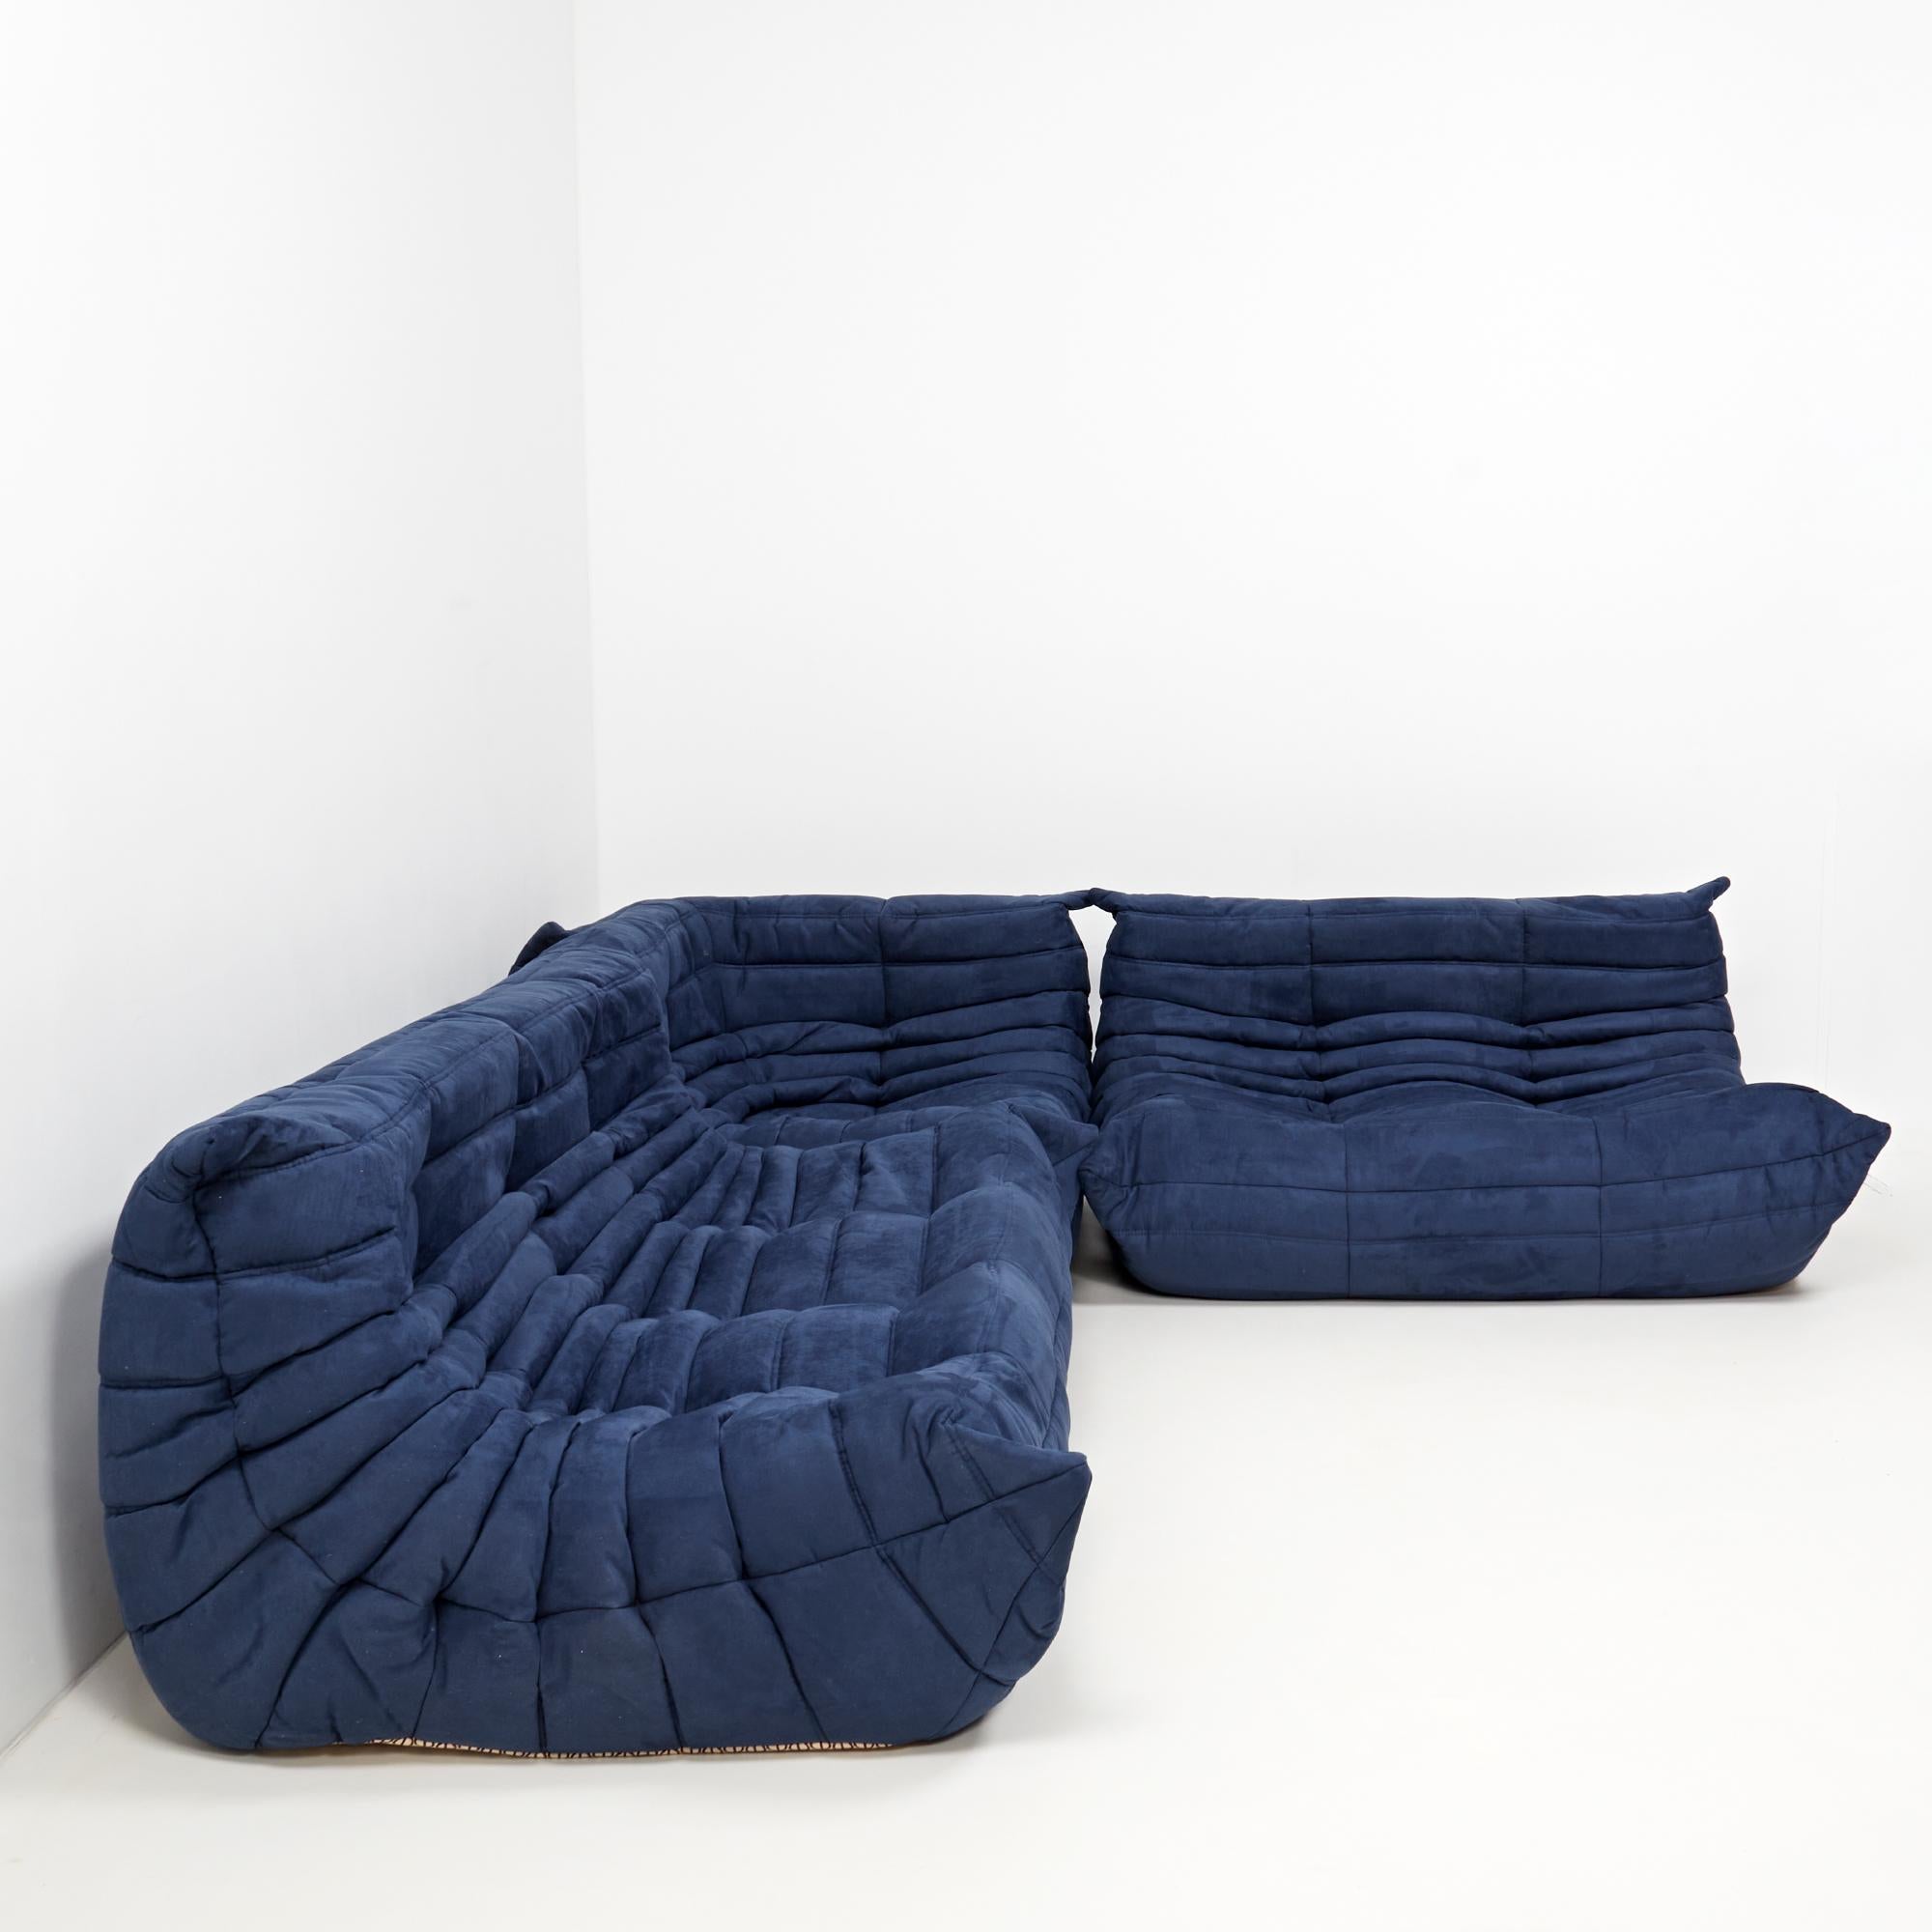 The iconic togo sofa set, originally designed by Michel Ducaroy for Ligne Roset in 1973, has become a design midcentury classic.

The sofas have been newly reupholstered in a soft dark blue coloured fabric. Made completely from foam, with three